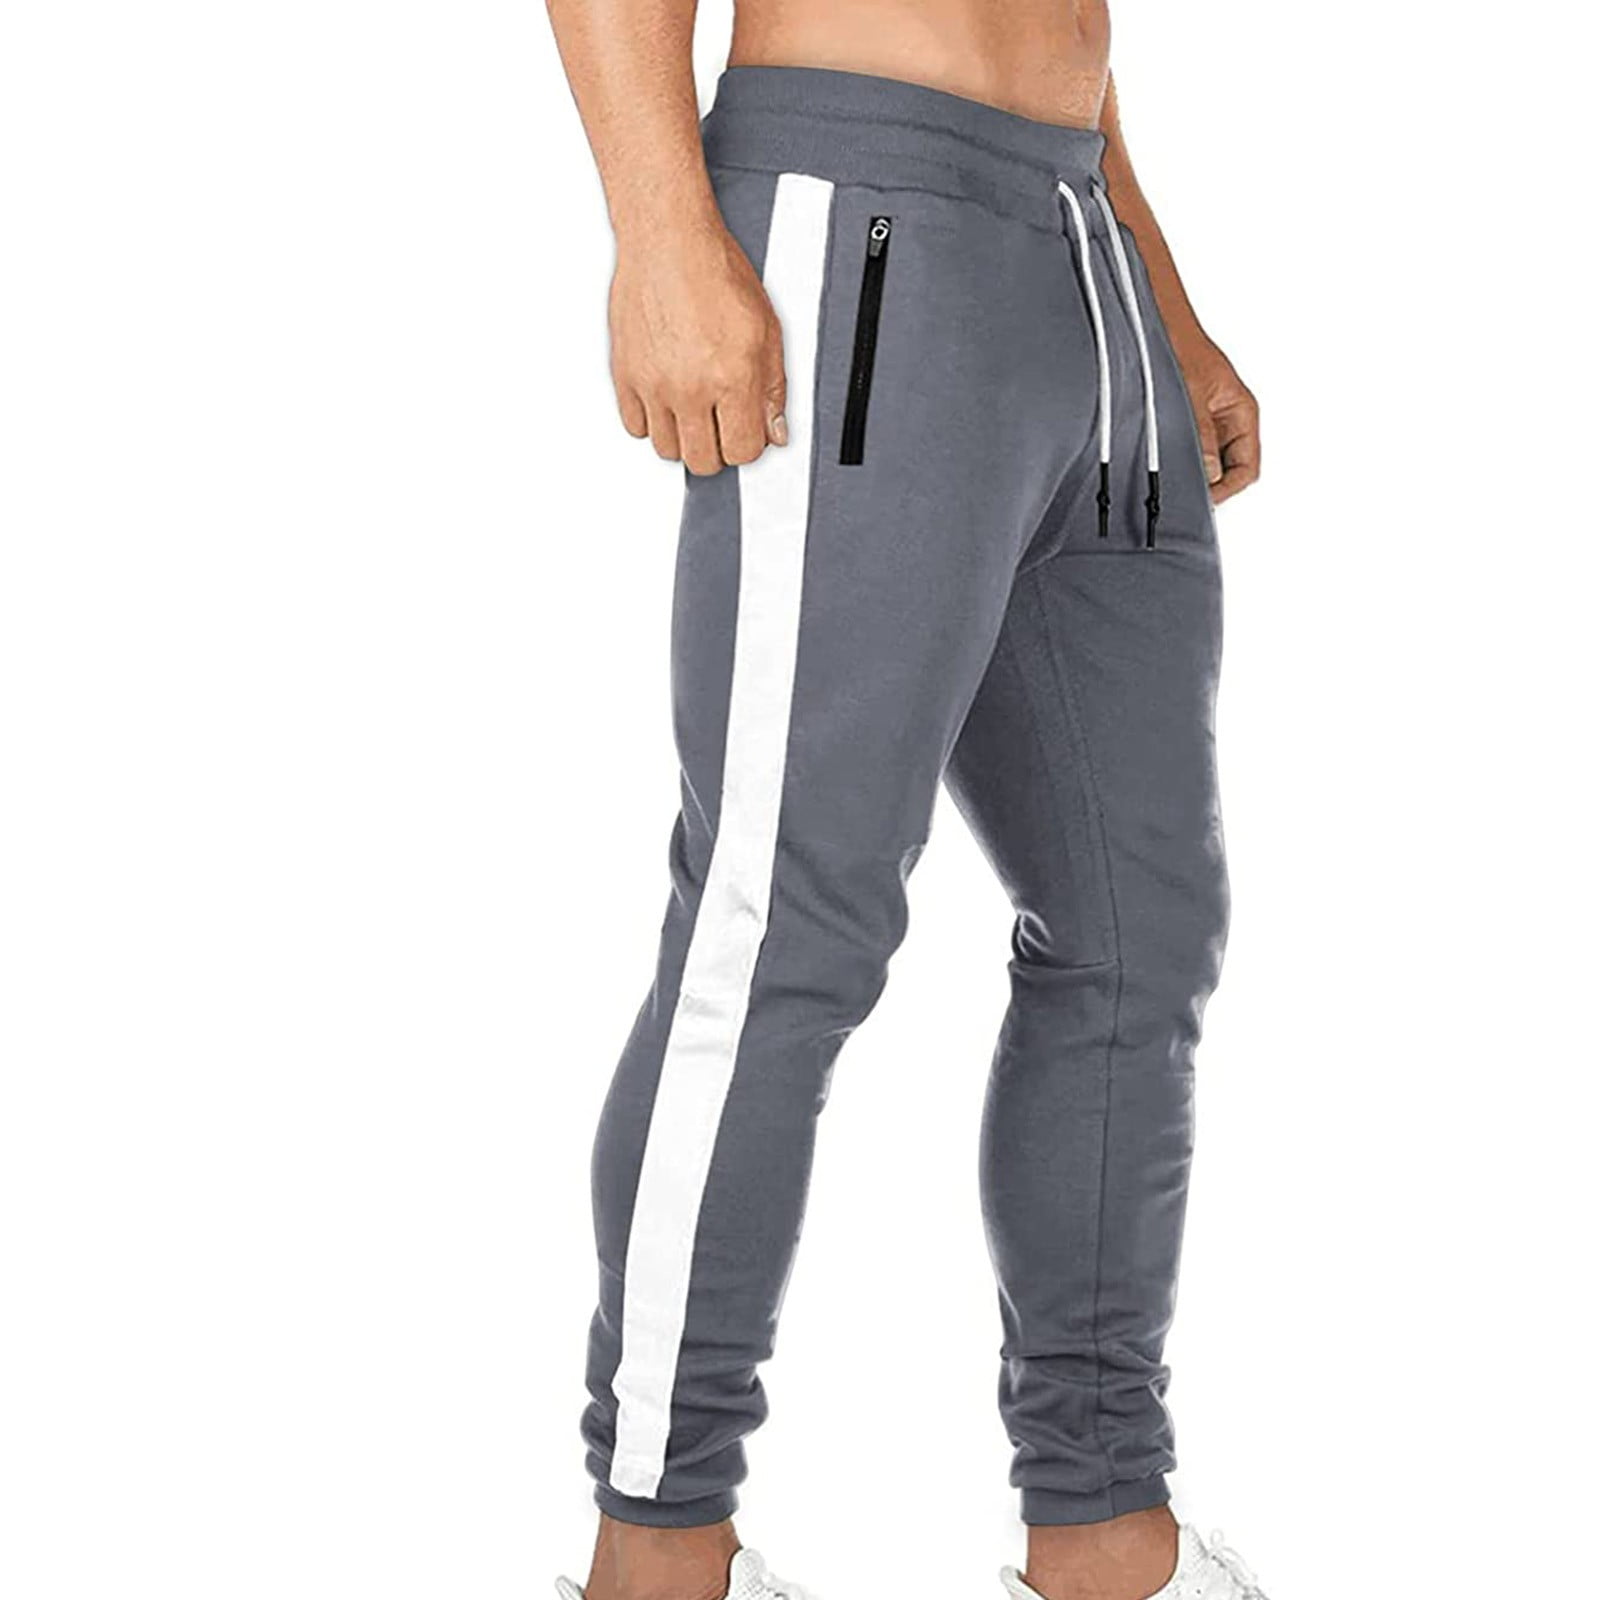 THE WILD Clearance Free Gray Men's Jogging Bottoms Sports Trousers Cotton Fitness Fit Training Trousers - Walmart.com